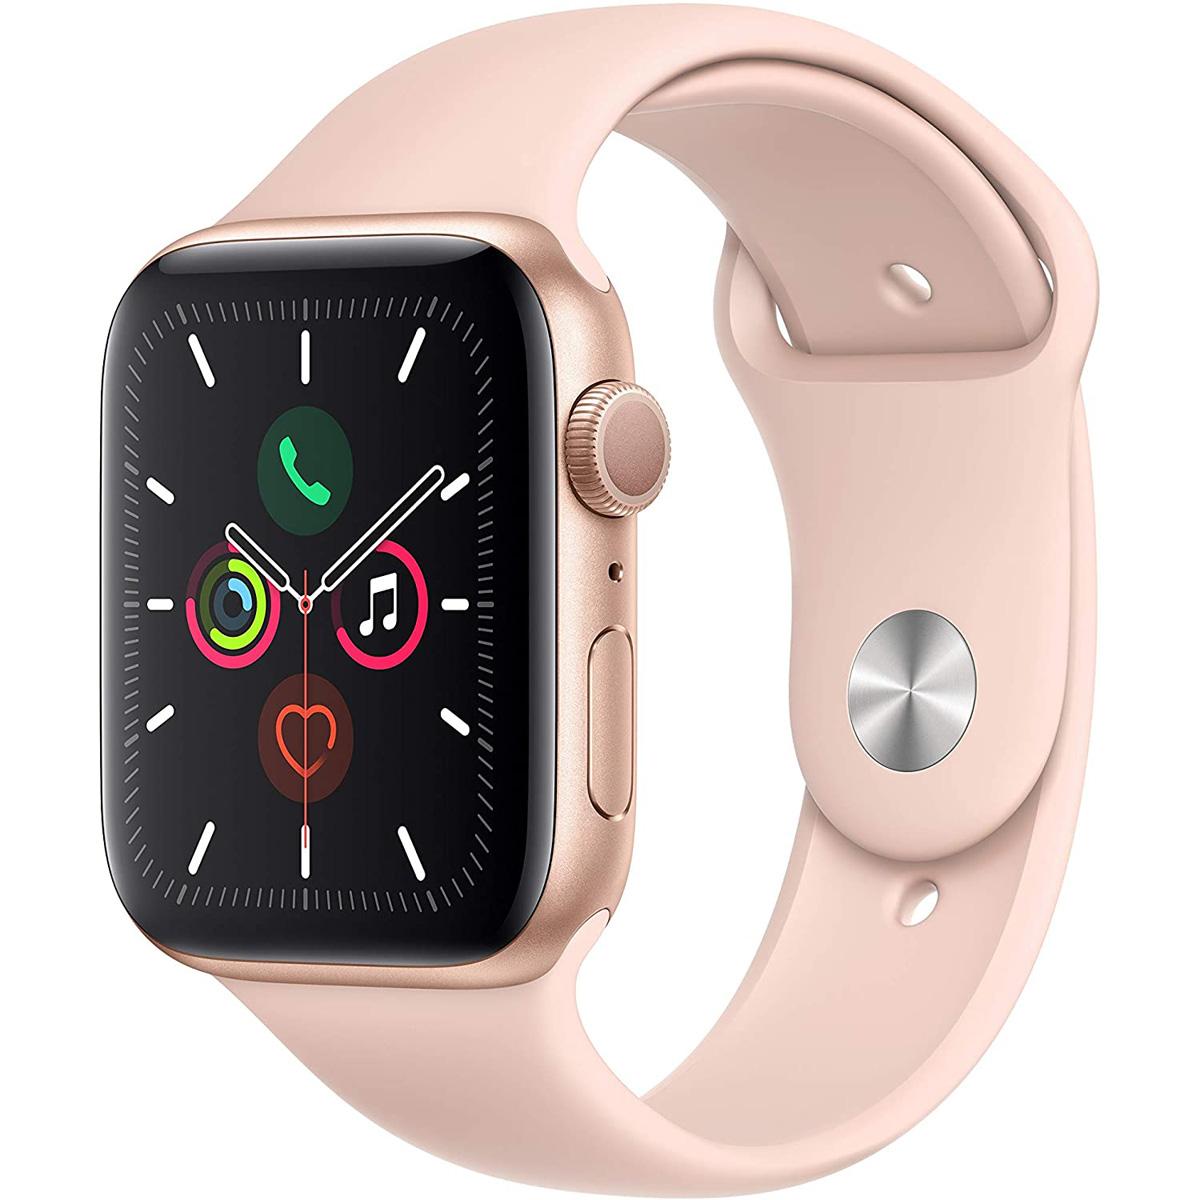 Apple Watch Series 5 44mm GPS Smartwatch for $299 shipped